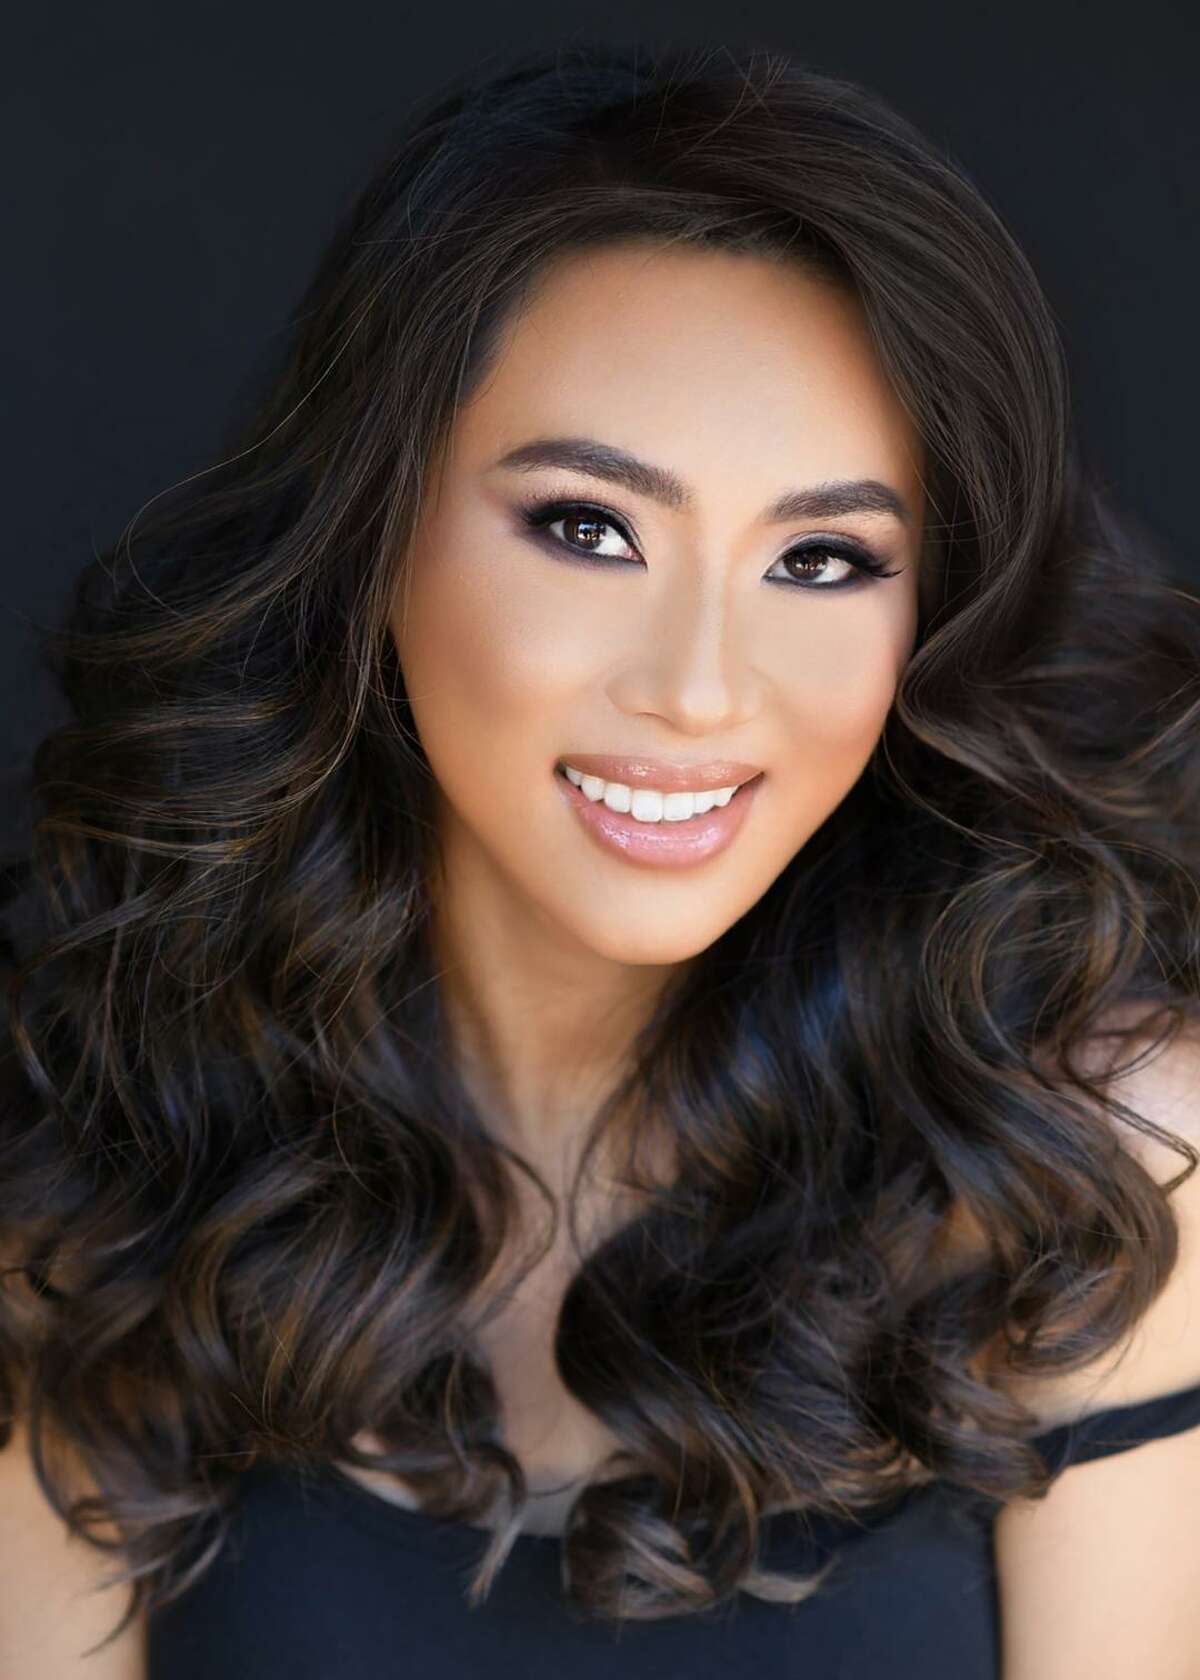 Denise Kwong  will represent Texas in the national finals of Miss Volunteer America next year.